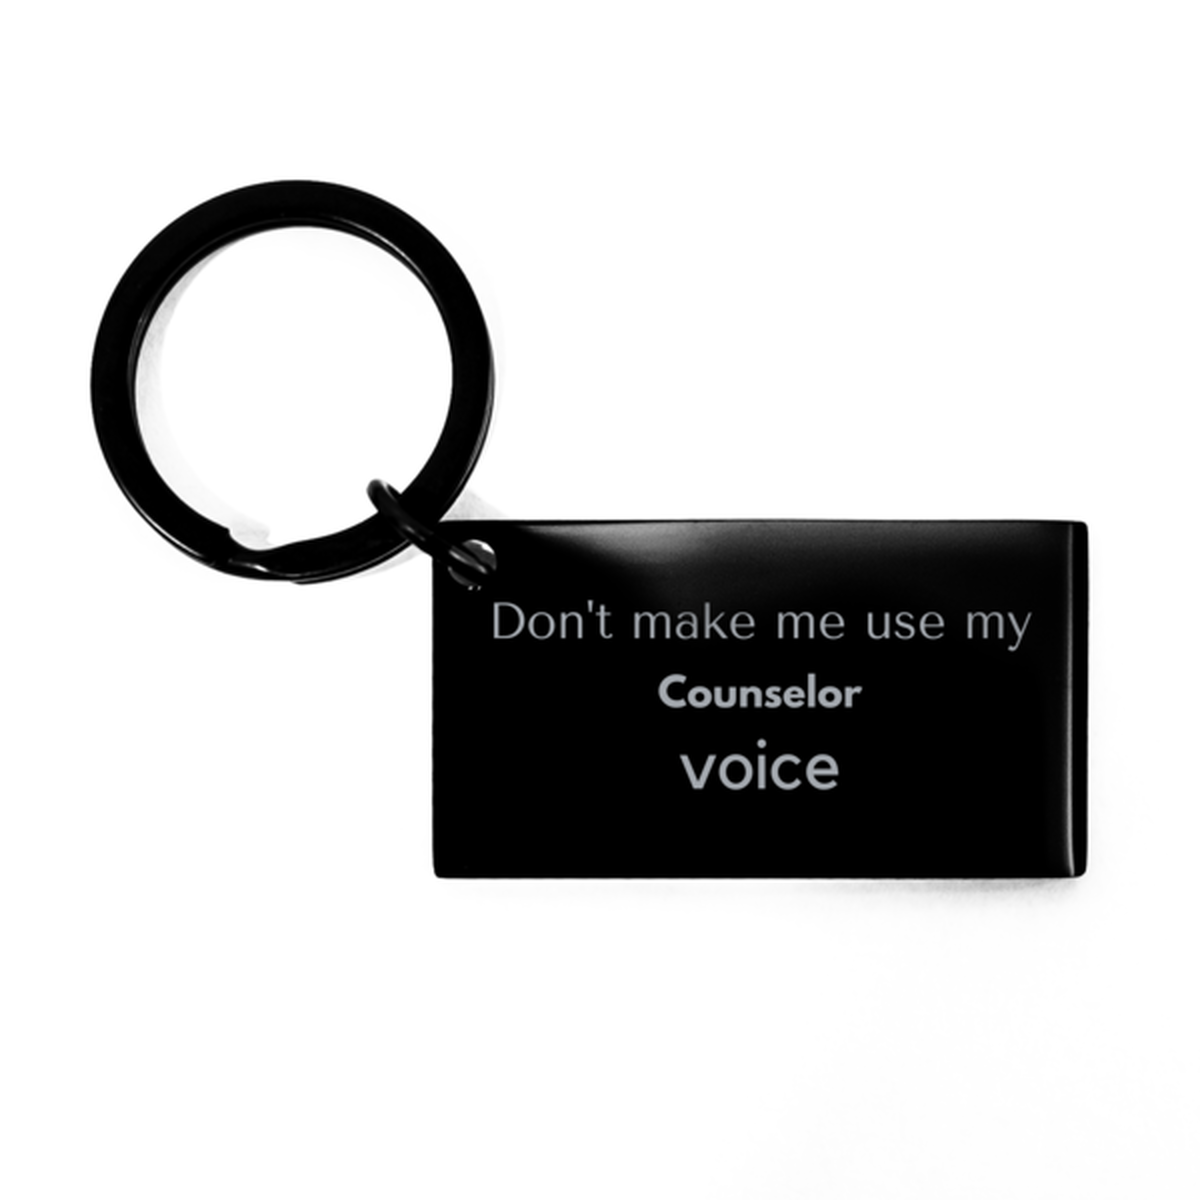 Don't make me use my Counselor voice, Sarcasm Counselor Gifts, Christmas Counselor Keychain Birthday Unique Gifts For Counselor Coworkers, Men, Women, Colleague, Friends